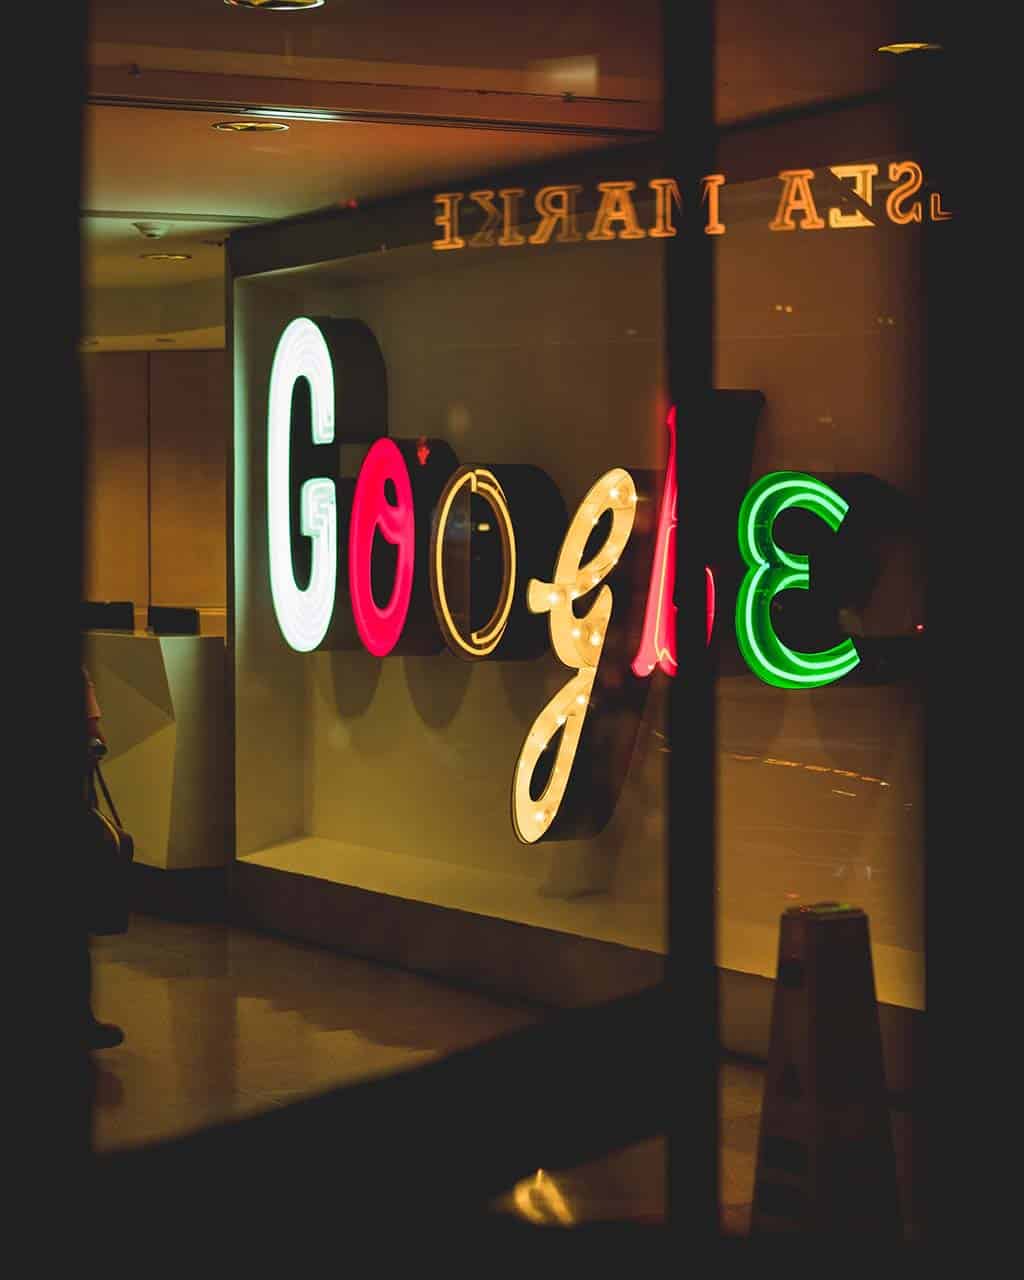 A neon google sign displayed backwards behind a glass window with dim ambient lighting and reflections visible on the glass.surface. the sign glows in bright red, blue, green, and yellow colors.